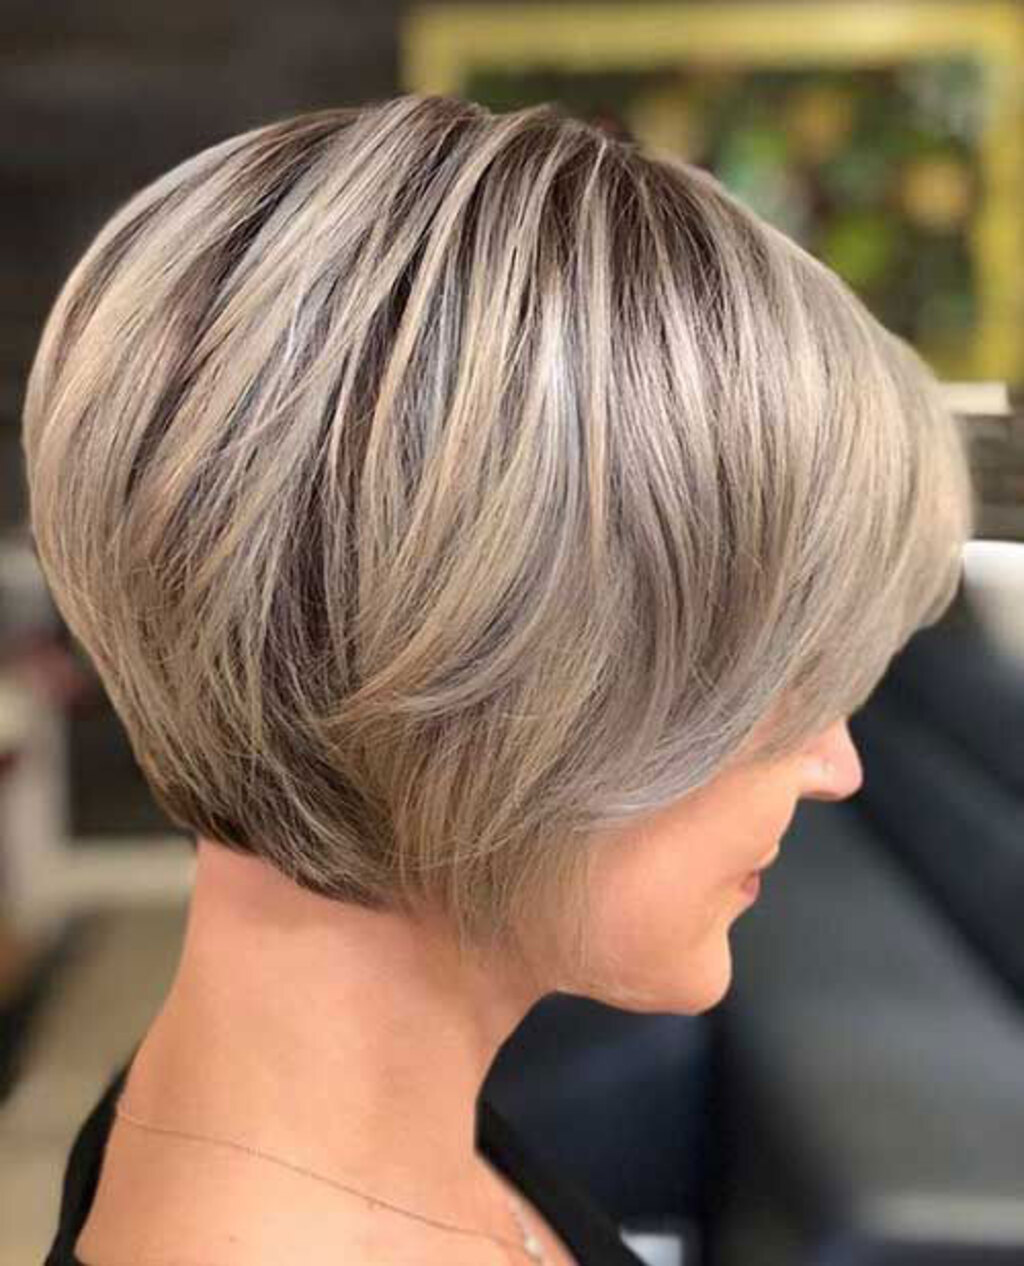 Super Short Stacked Rounded Bob Cut